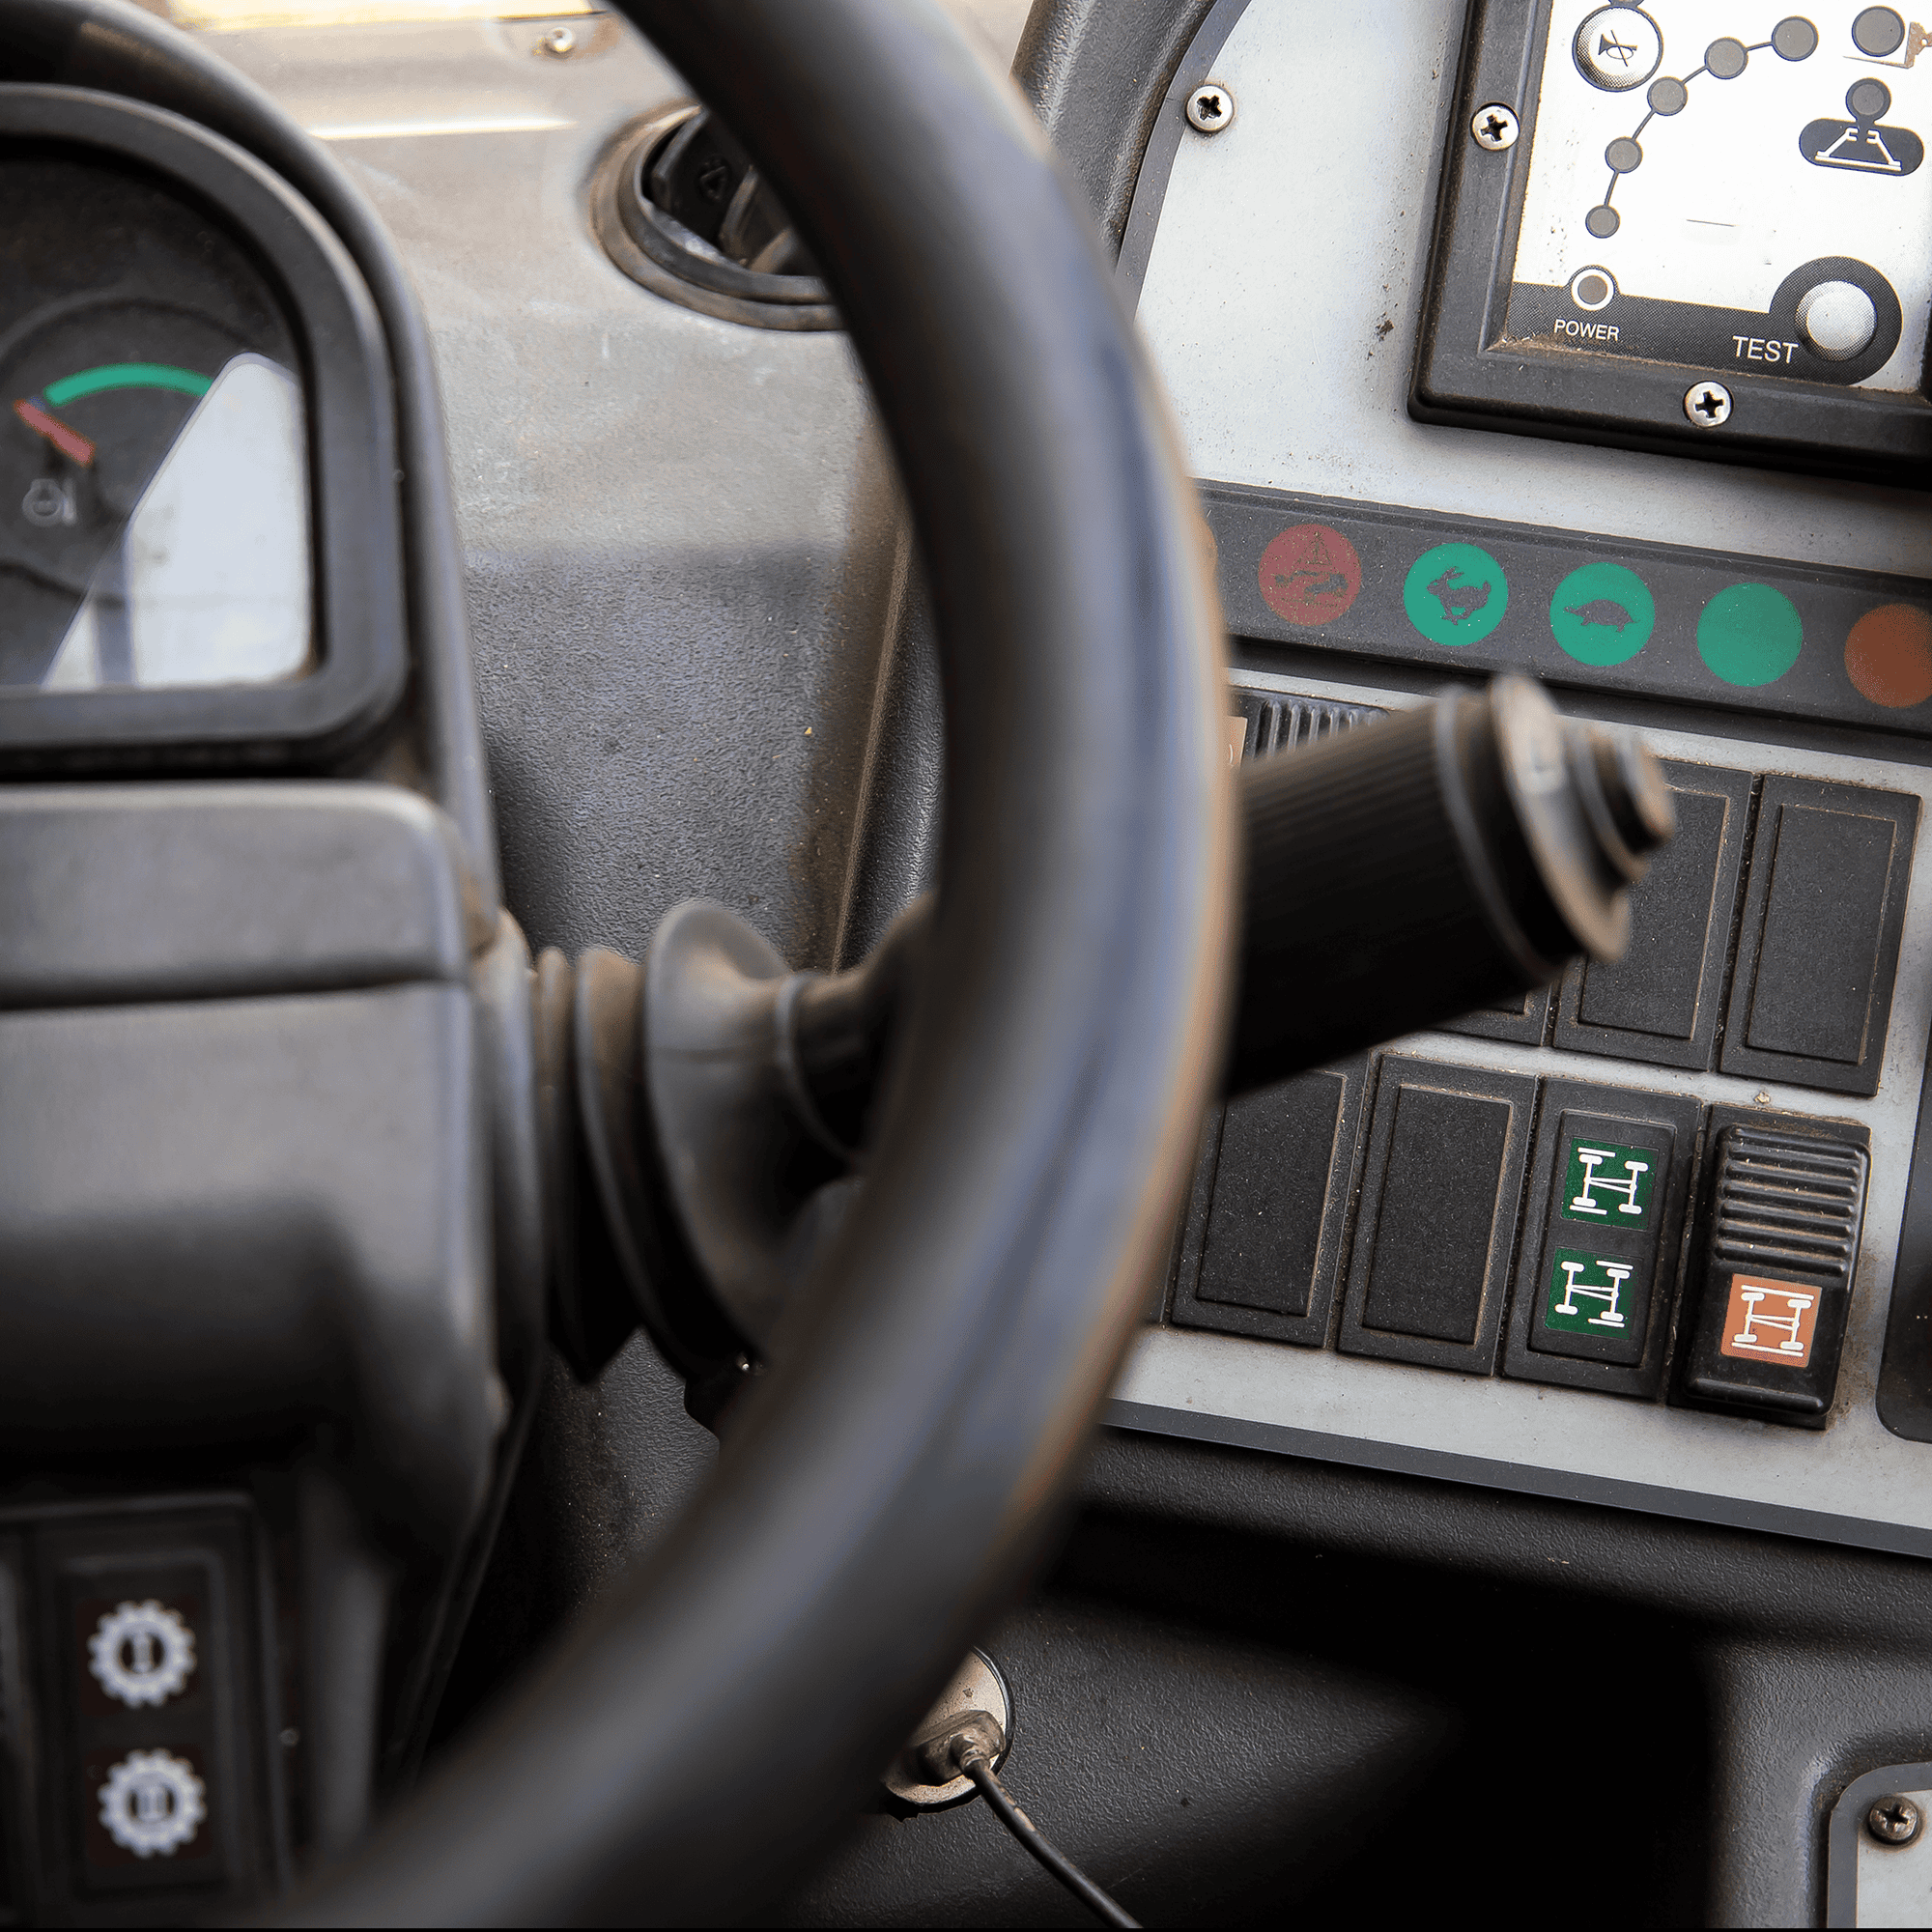 The inside dash in the cab of a heavy equipment machine